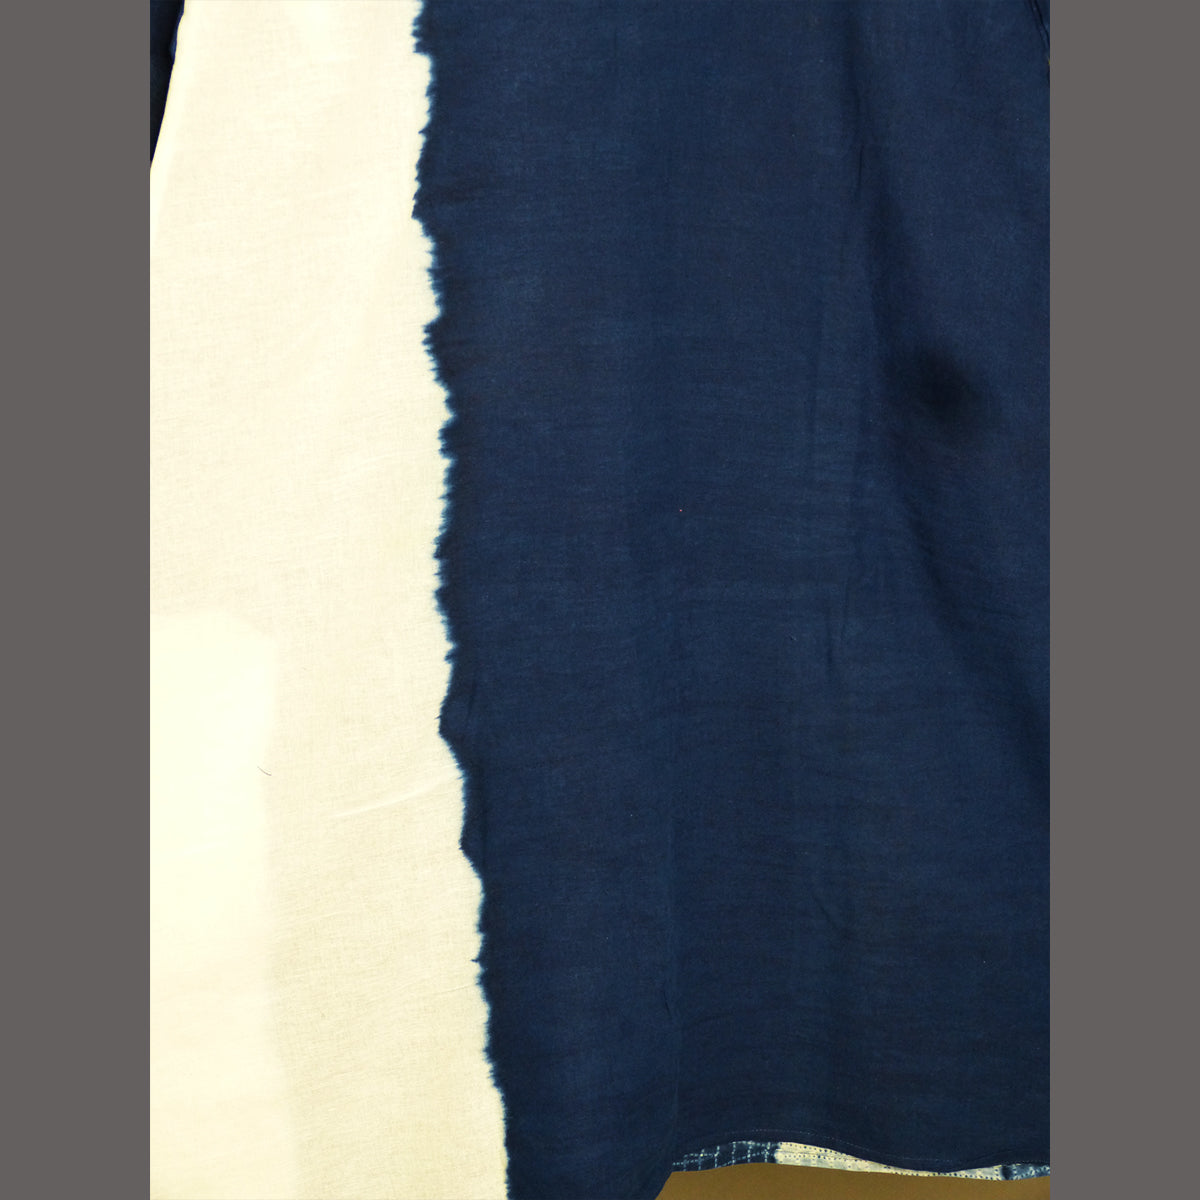 Smart indigo Shirt dress with an interplay of shibori textures and plain dyed & undyed spaces - 4